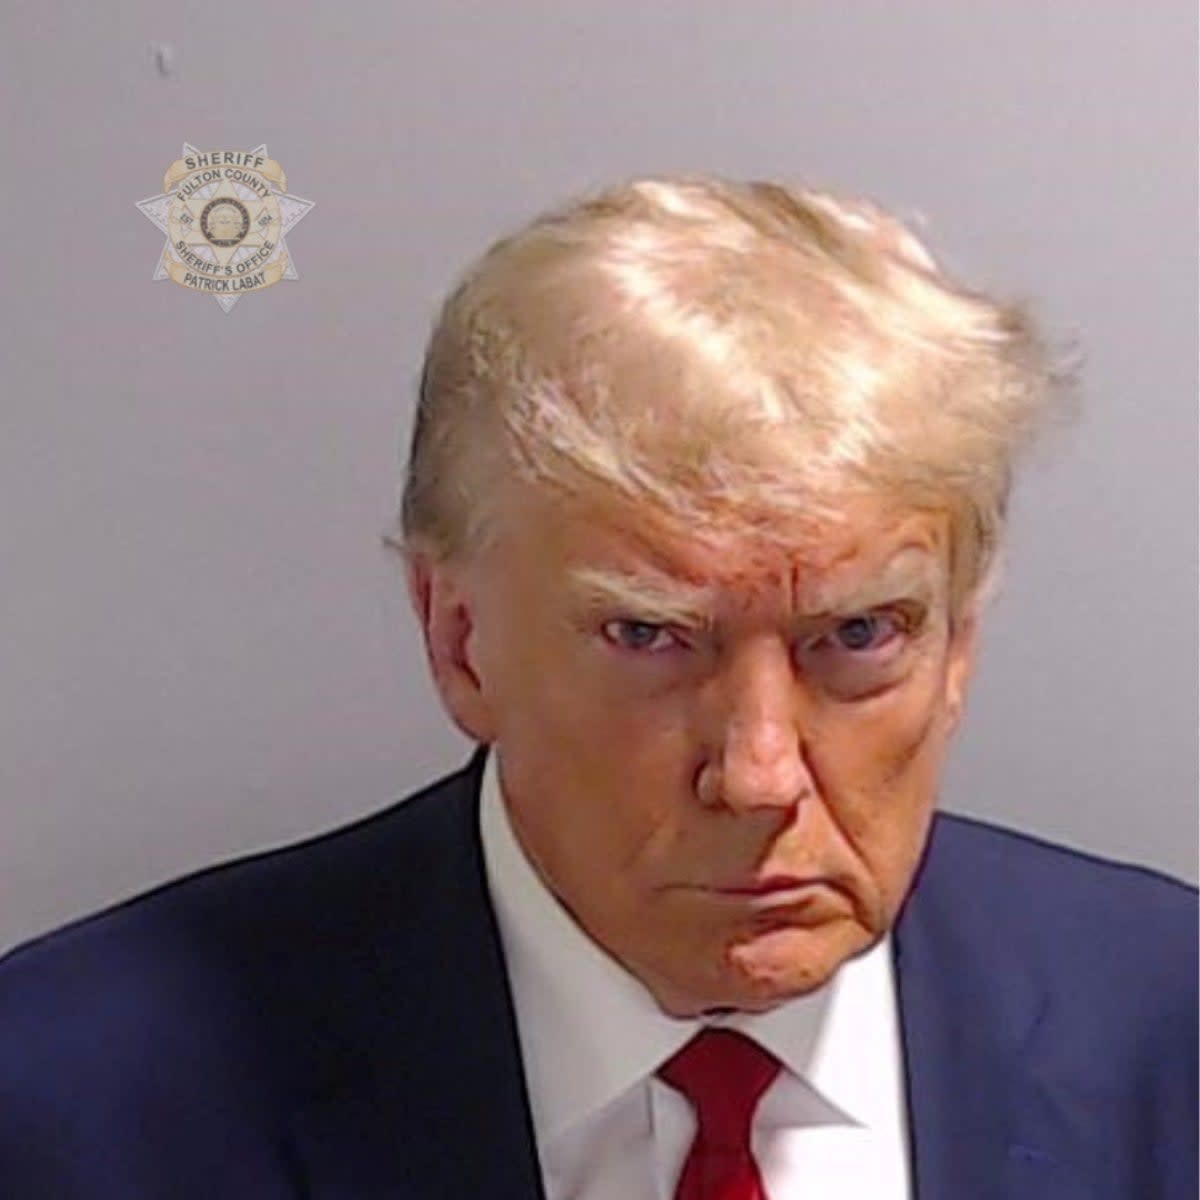 Former President Donald Trump is shown in a police booking mugshot released by the Fulton County Sheriff’s Office (via REUTERS)